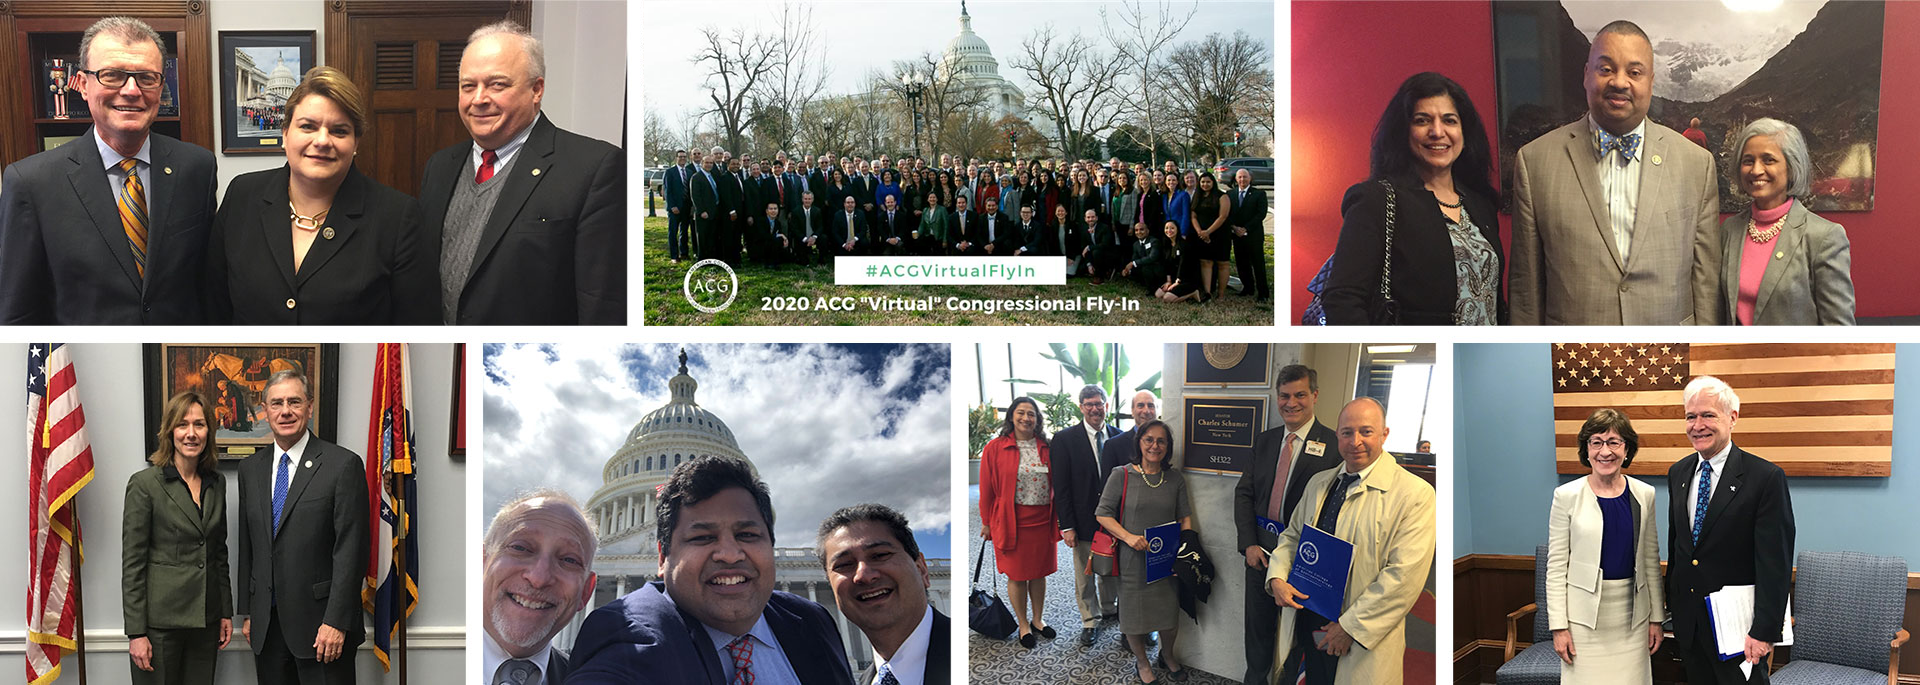 2020 ACG Virtual Congressional Fly-In